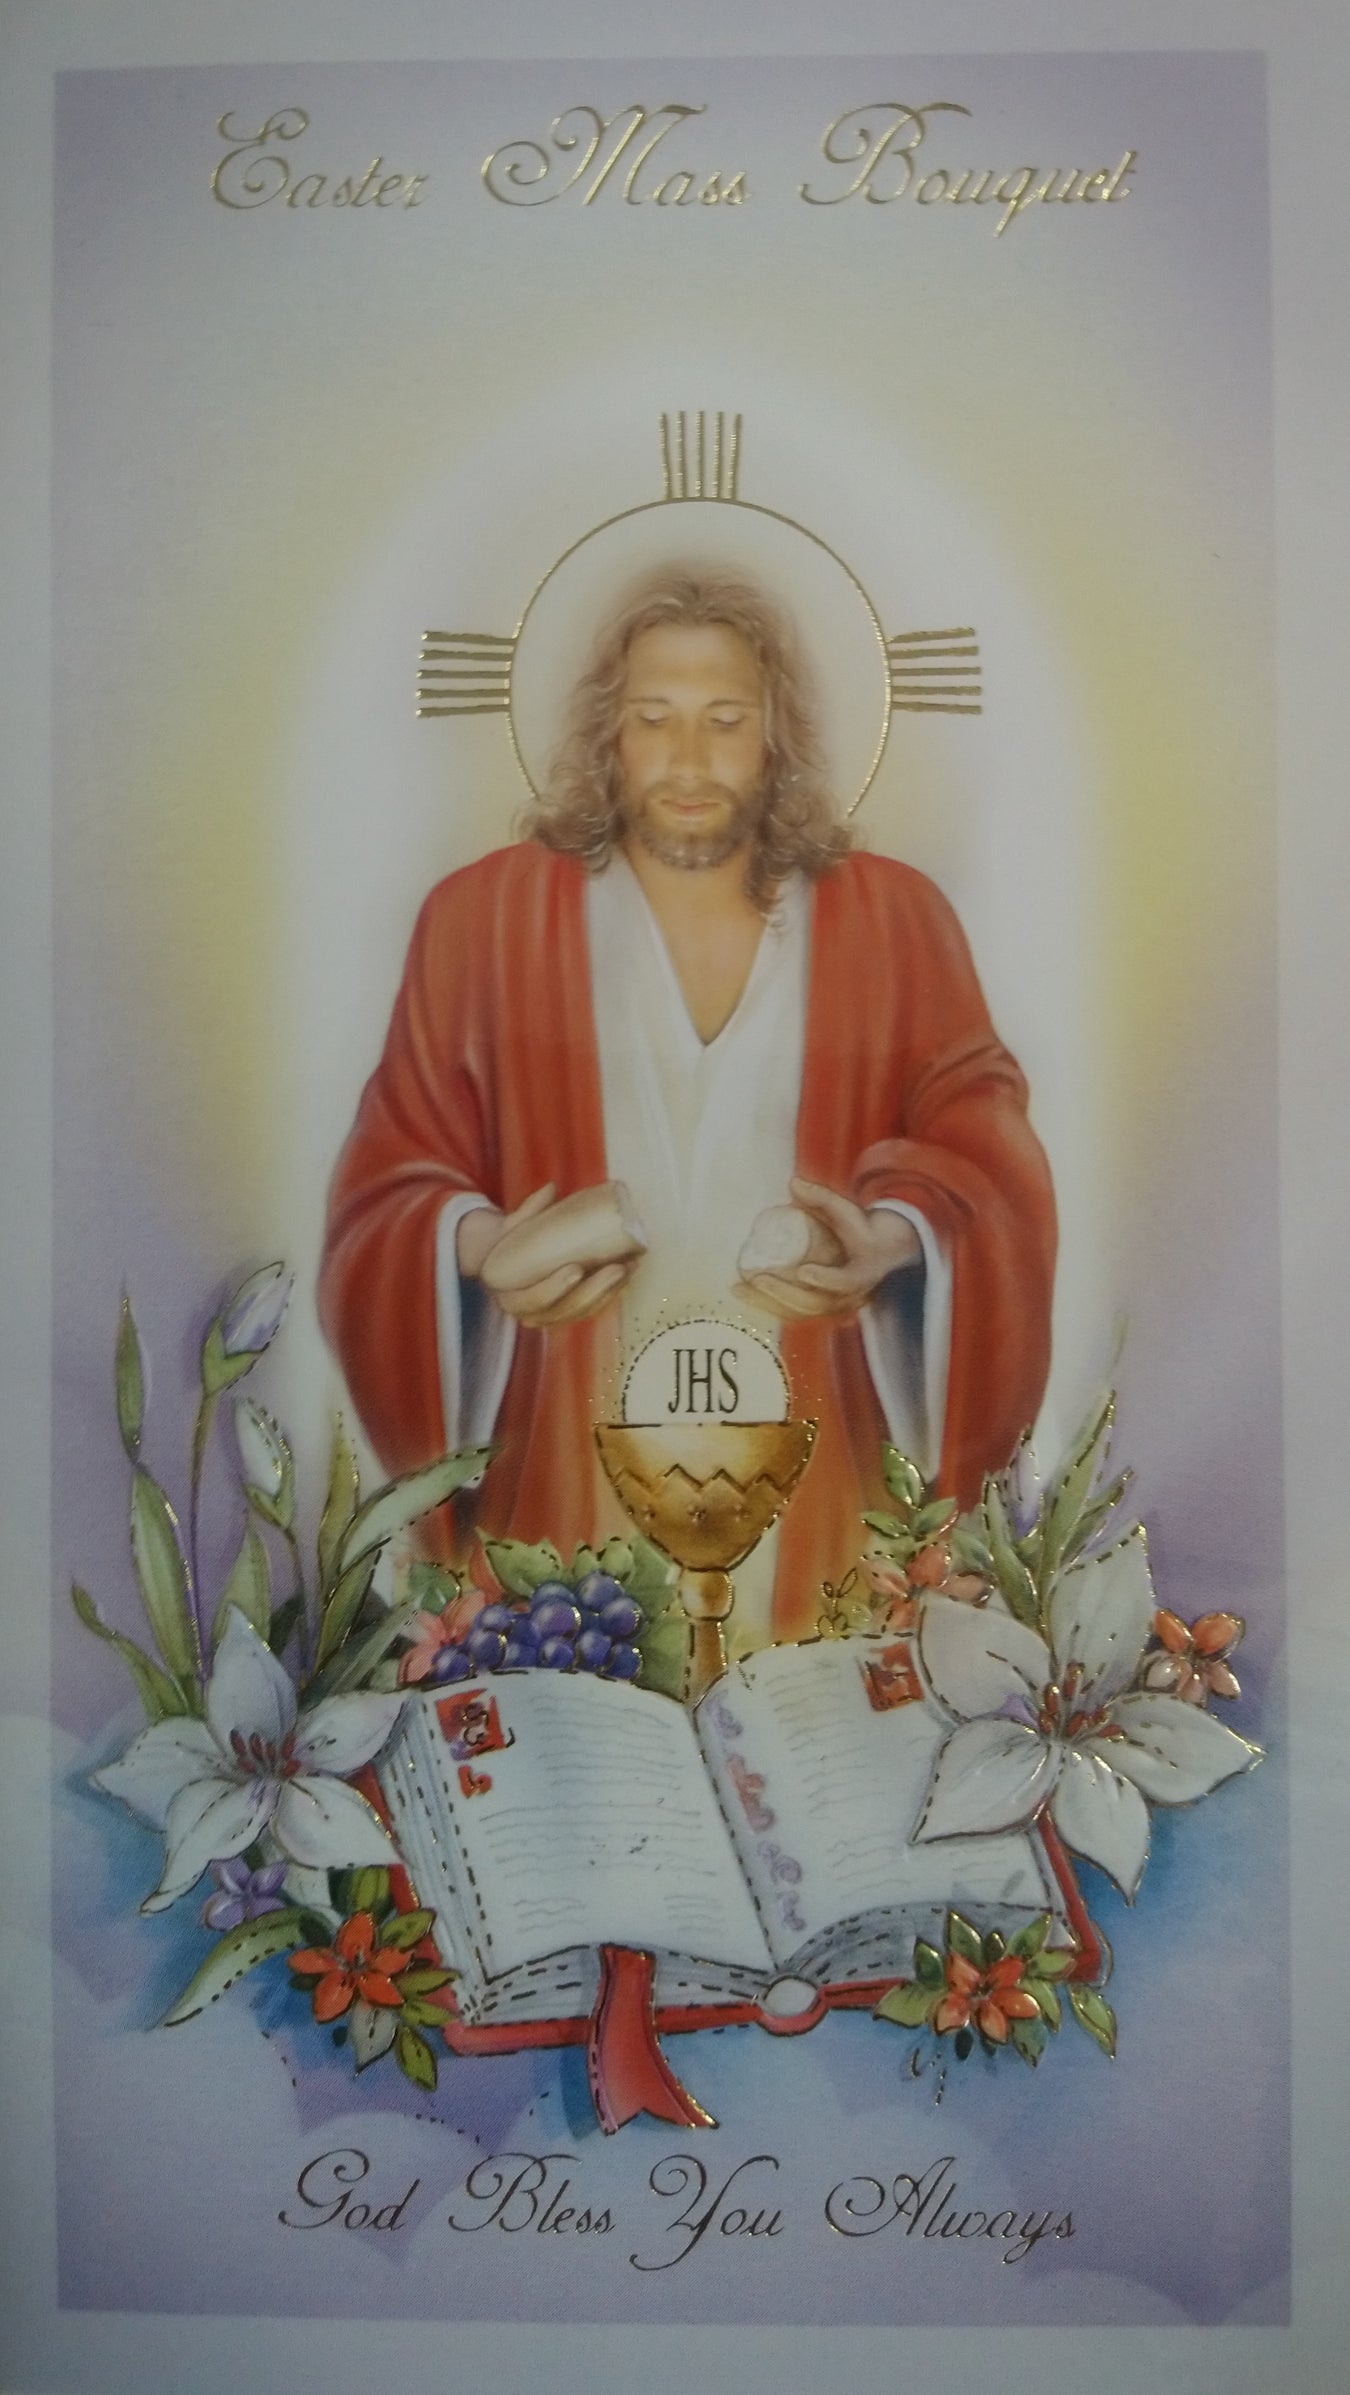 Easter Mass Cards